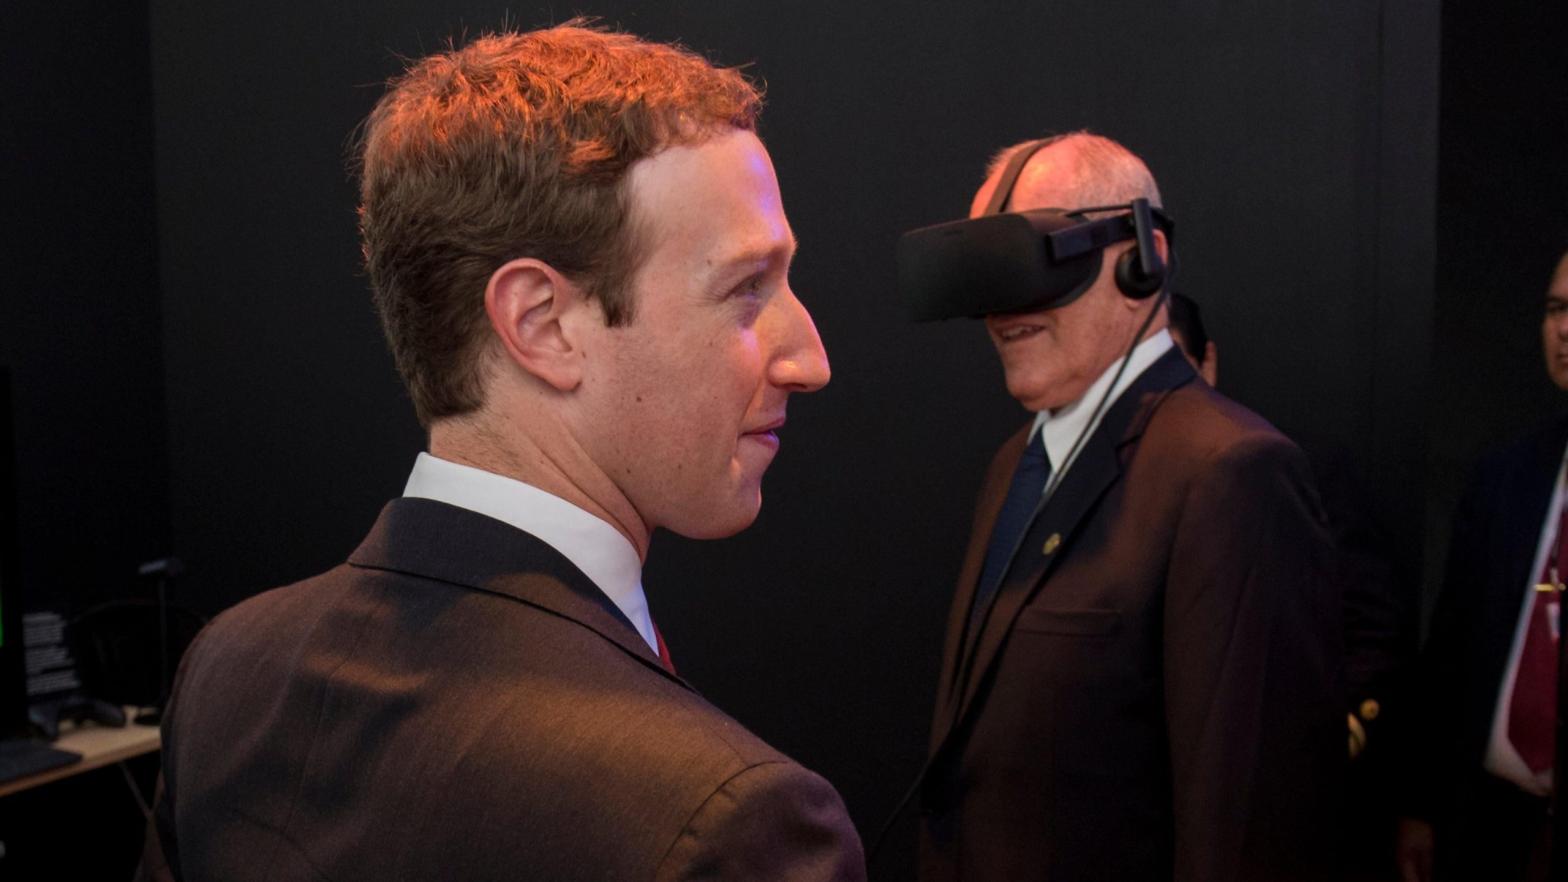 Facebook founder Mark Zuckerberg, seen here alongside Peruvian President Pedro Pablo Kuczynski trying on an Oculus headset at Facebook's booth at the Asia-Pacific Economic Corporation Summit in Lima in November 2016. (Photo: Pablo Porciuncula / AFP, Getty Images)